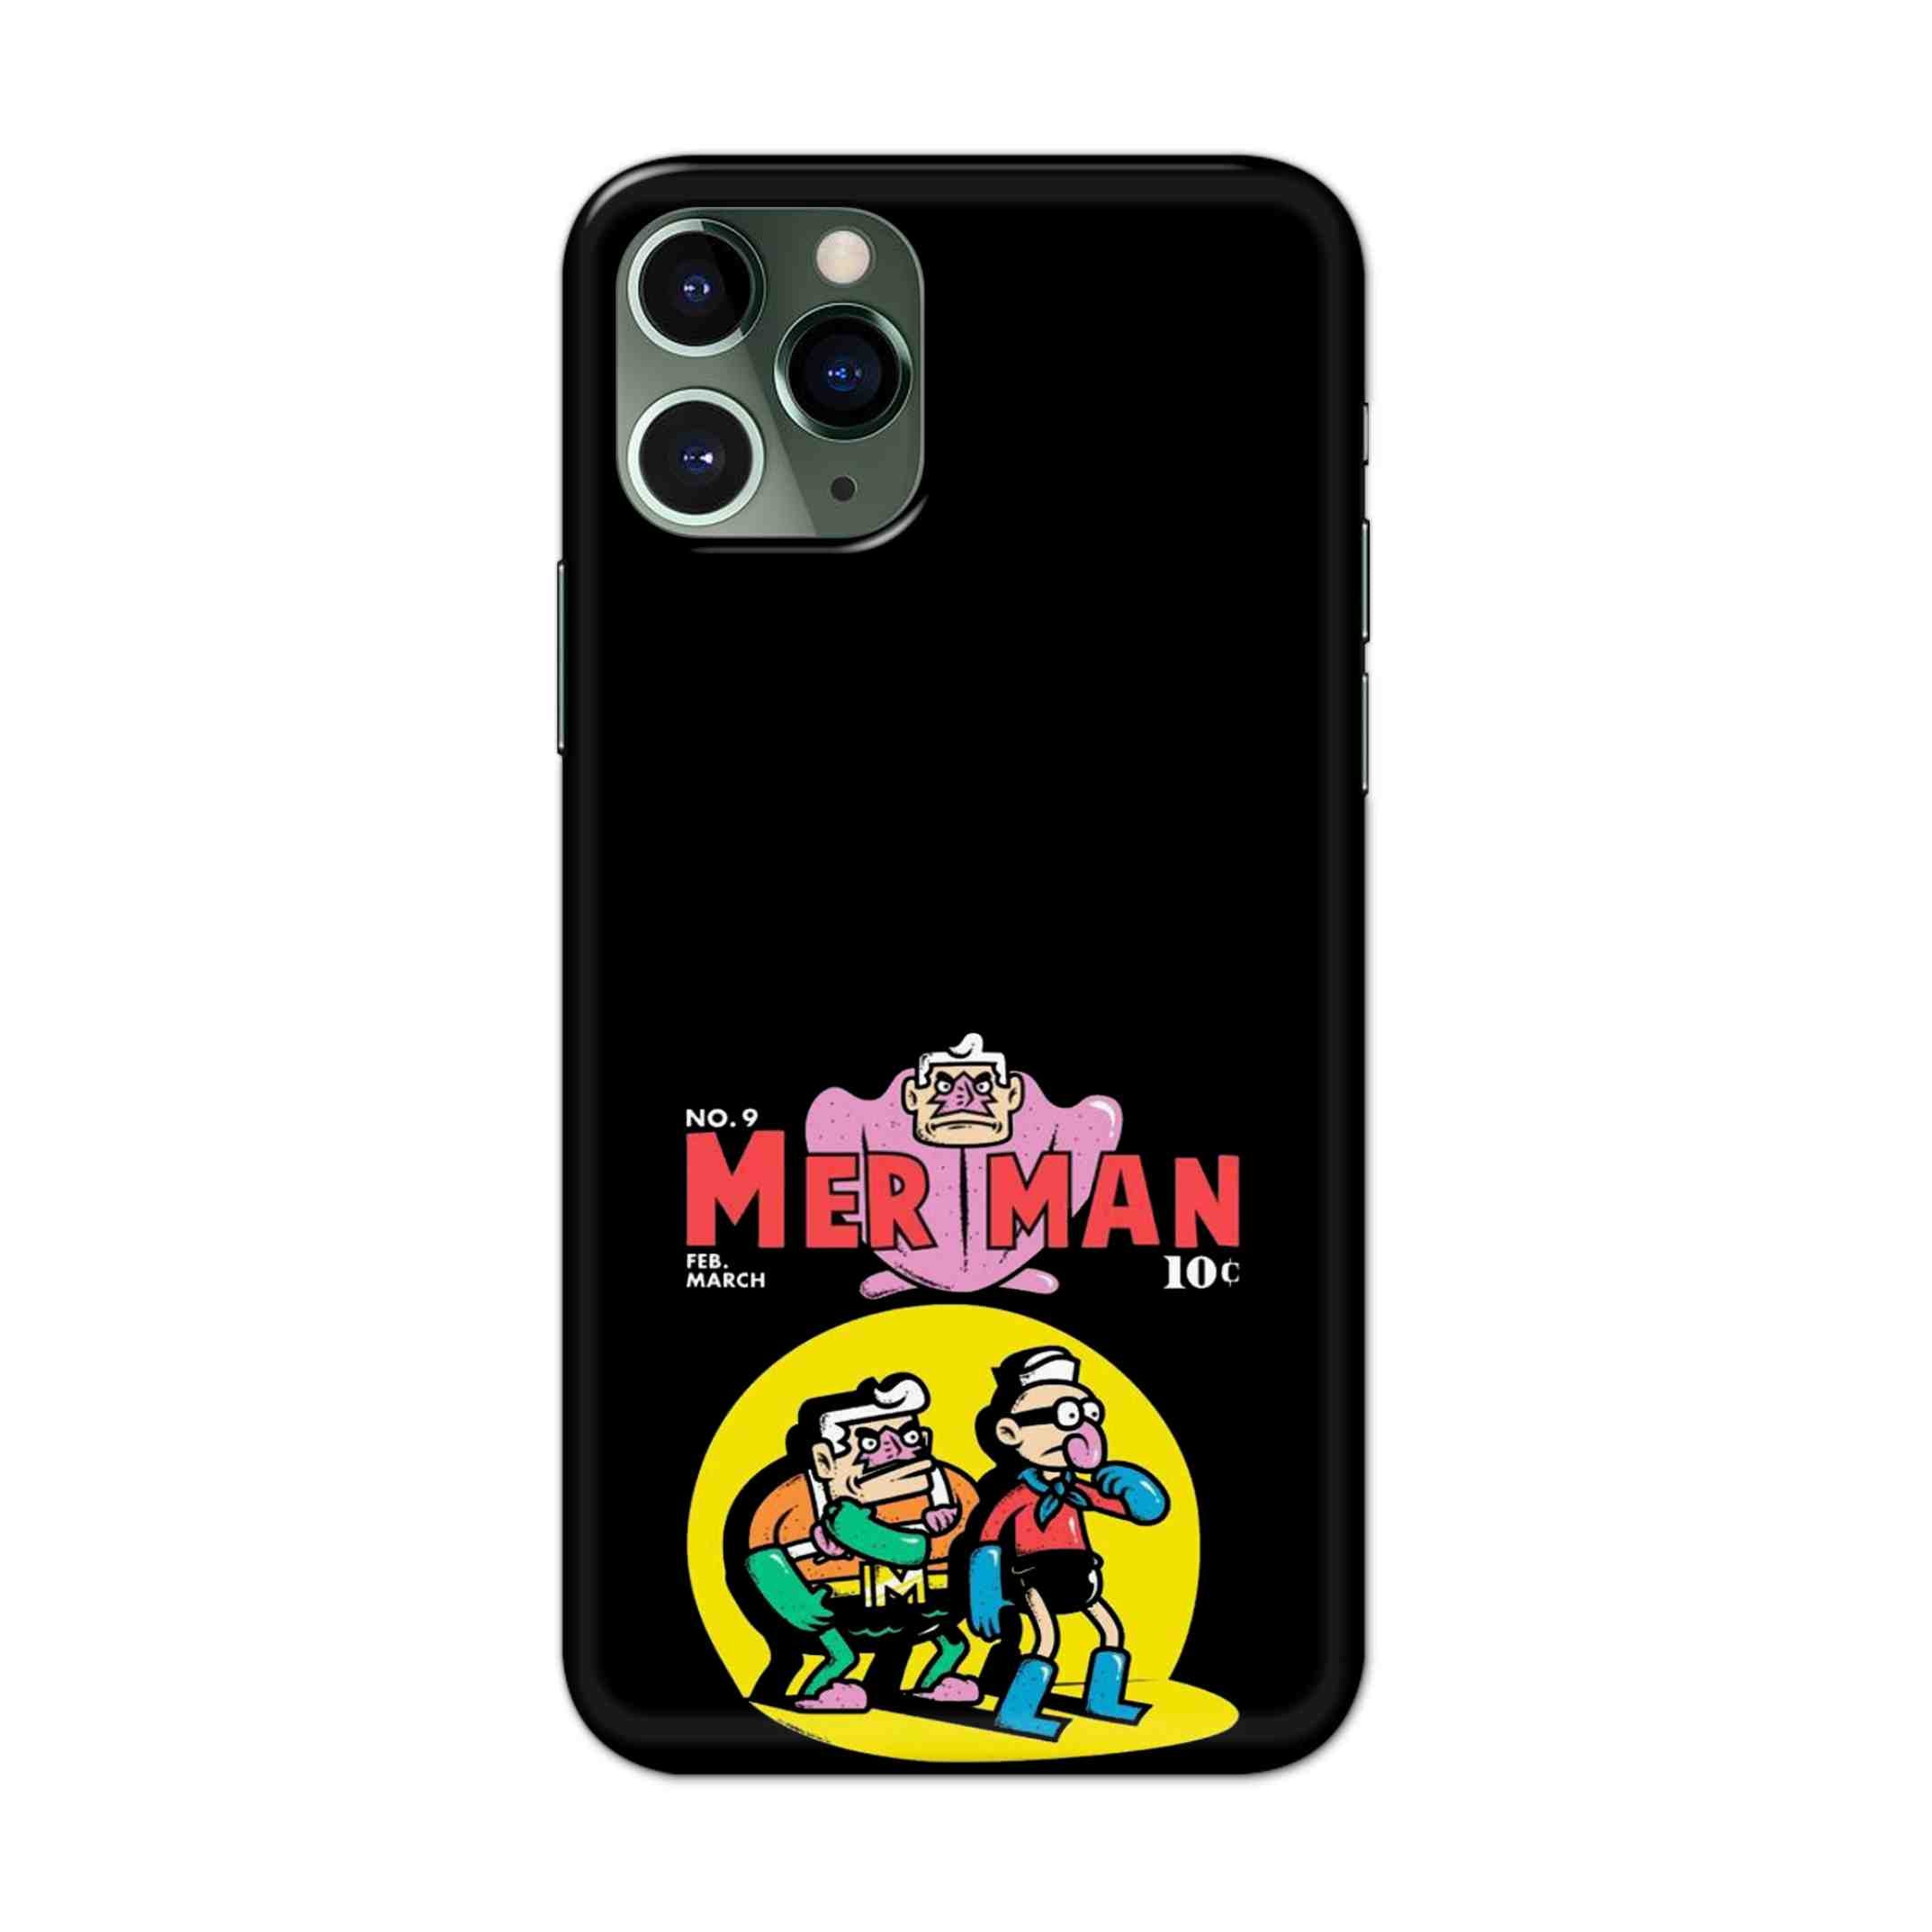 Buy Merman Hard Back Mobile Phone Case/Cover For iPhone 11 Pro Online